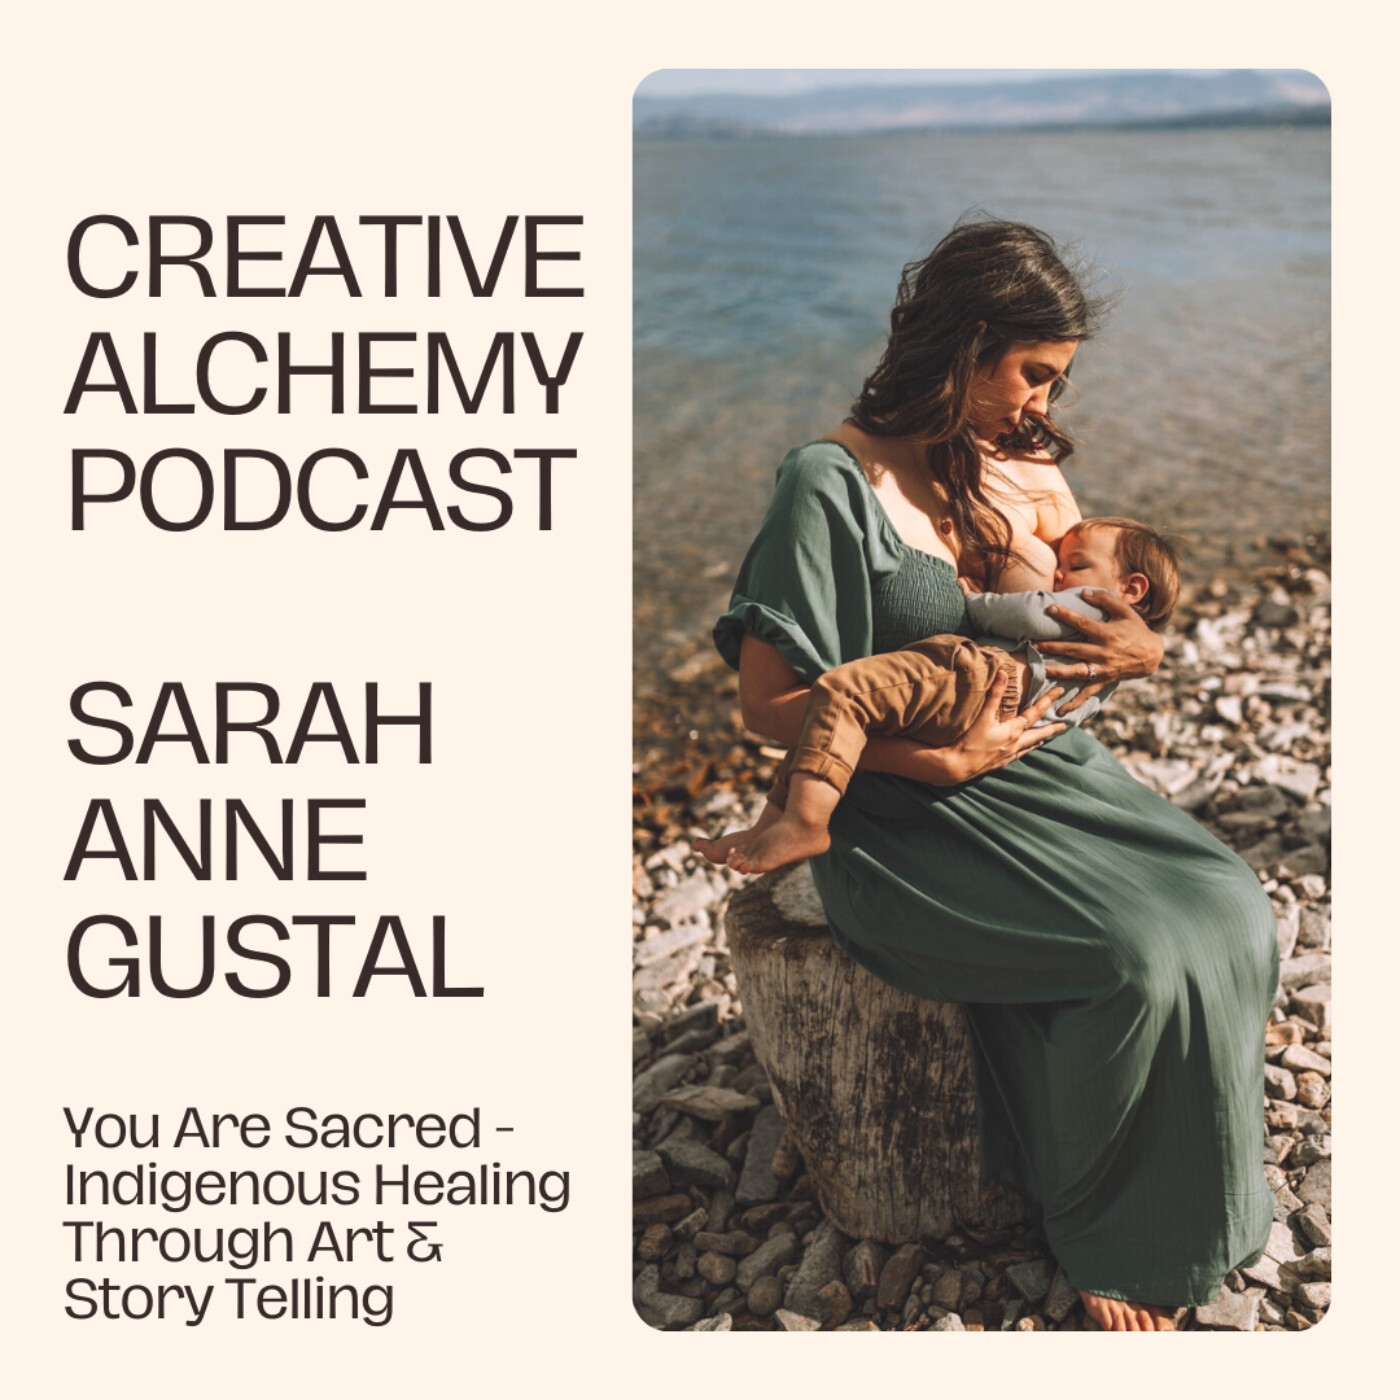 You Are Sacred - Indigenous Healing Through Art & Story Telling with Sarah Anne Gustal Image